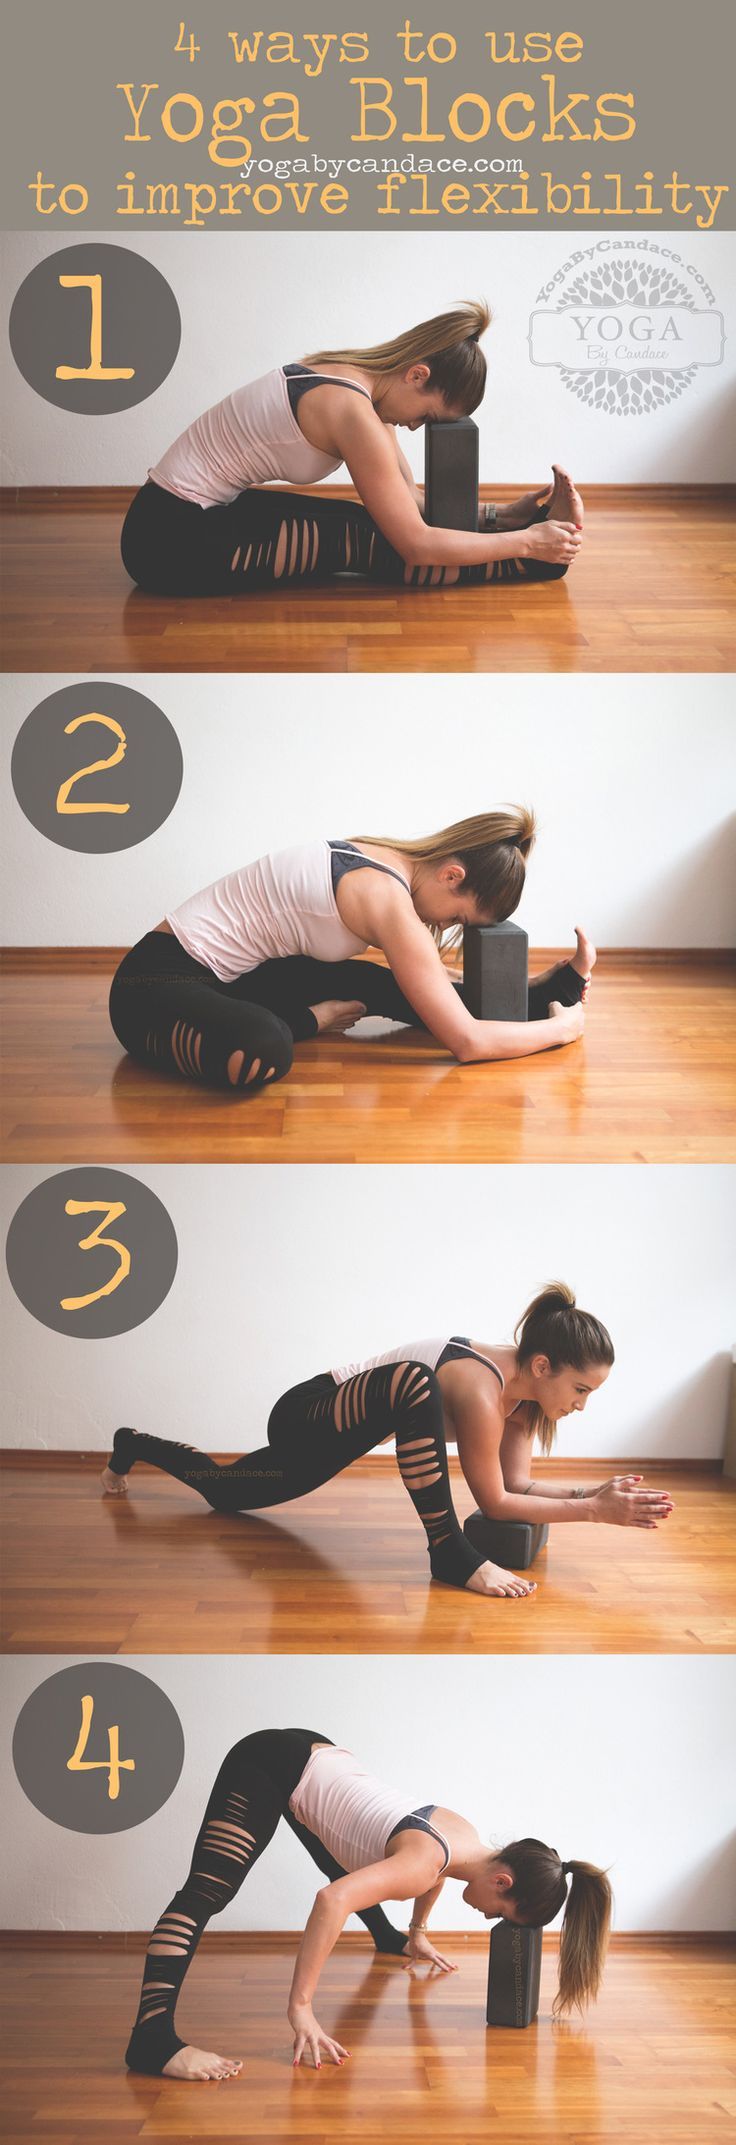 Pin now, practice later! 4 ways to use yoga blocks to improve your flexibility